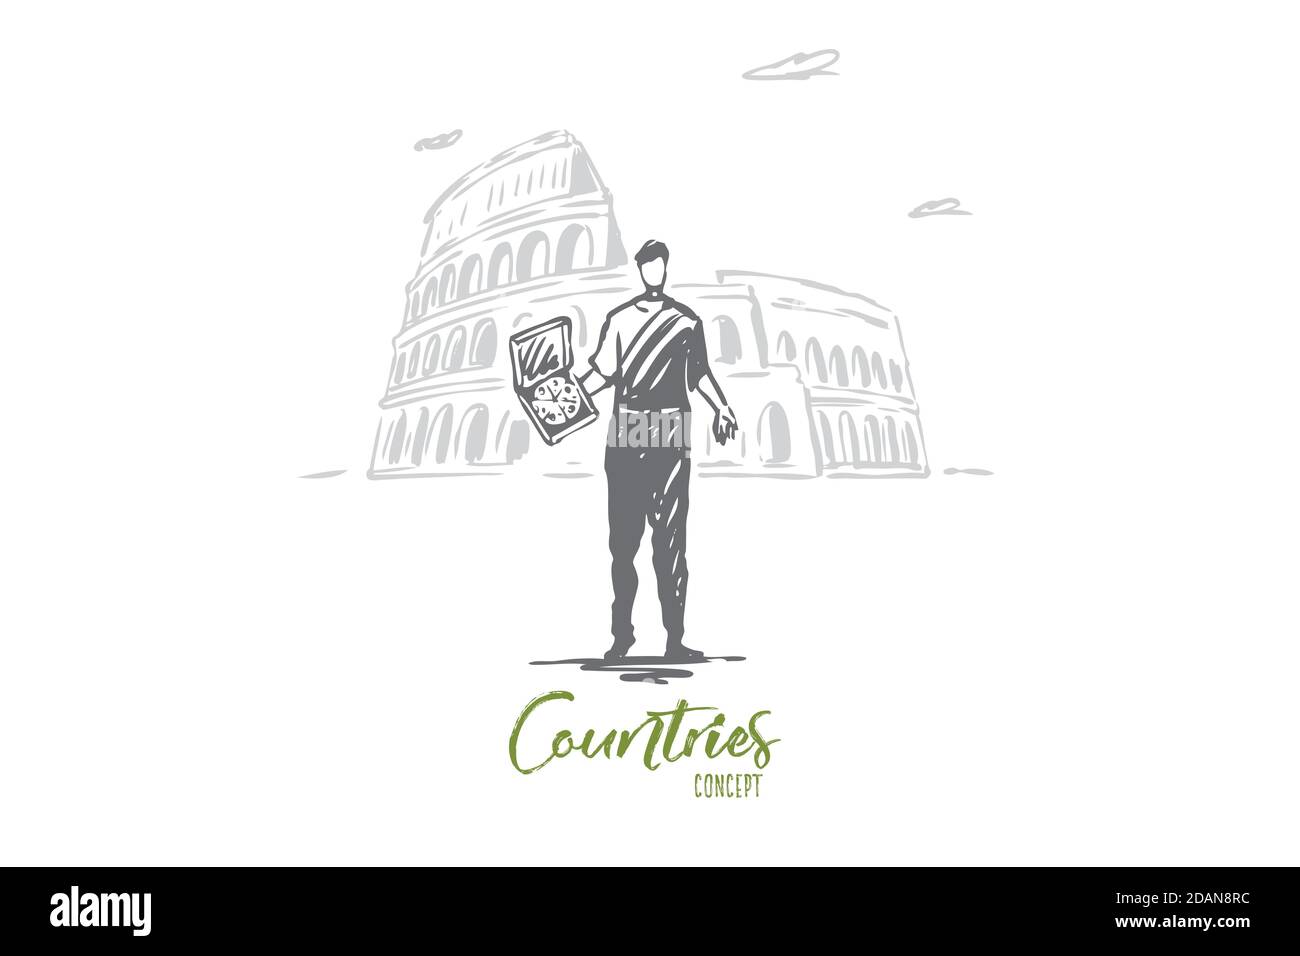 Italy, country, pizza, Colosseum, Rome concept. Hand drawn isolated vector. Stock Vector